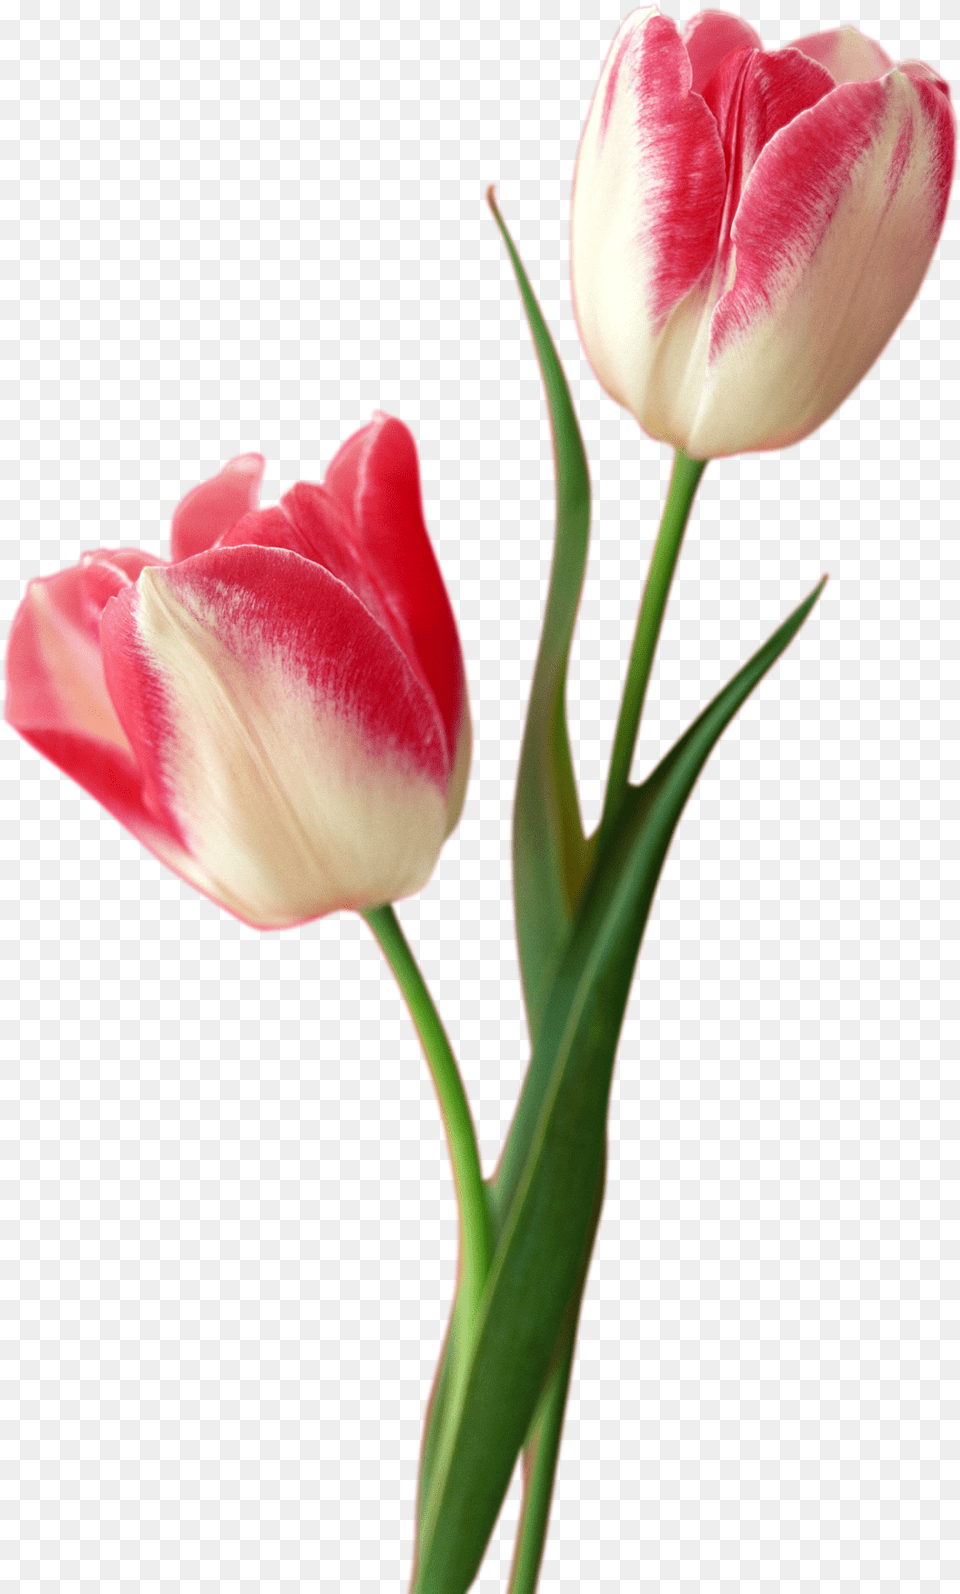 Tulip Free Download Tulips, Flower, Plant, Rose Png